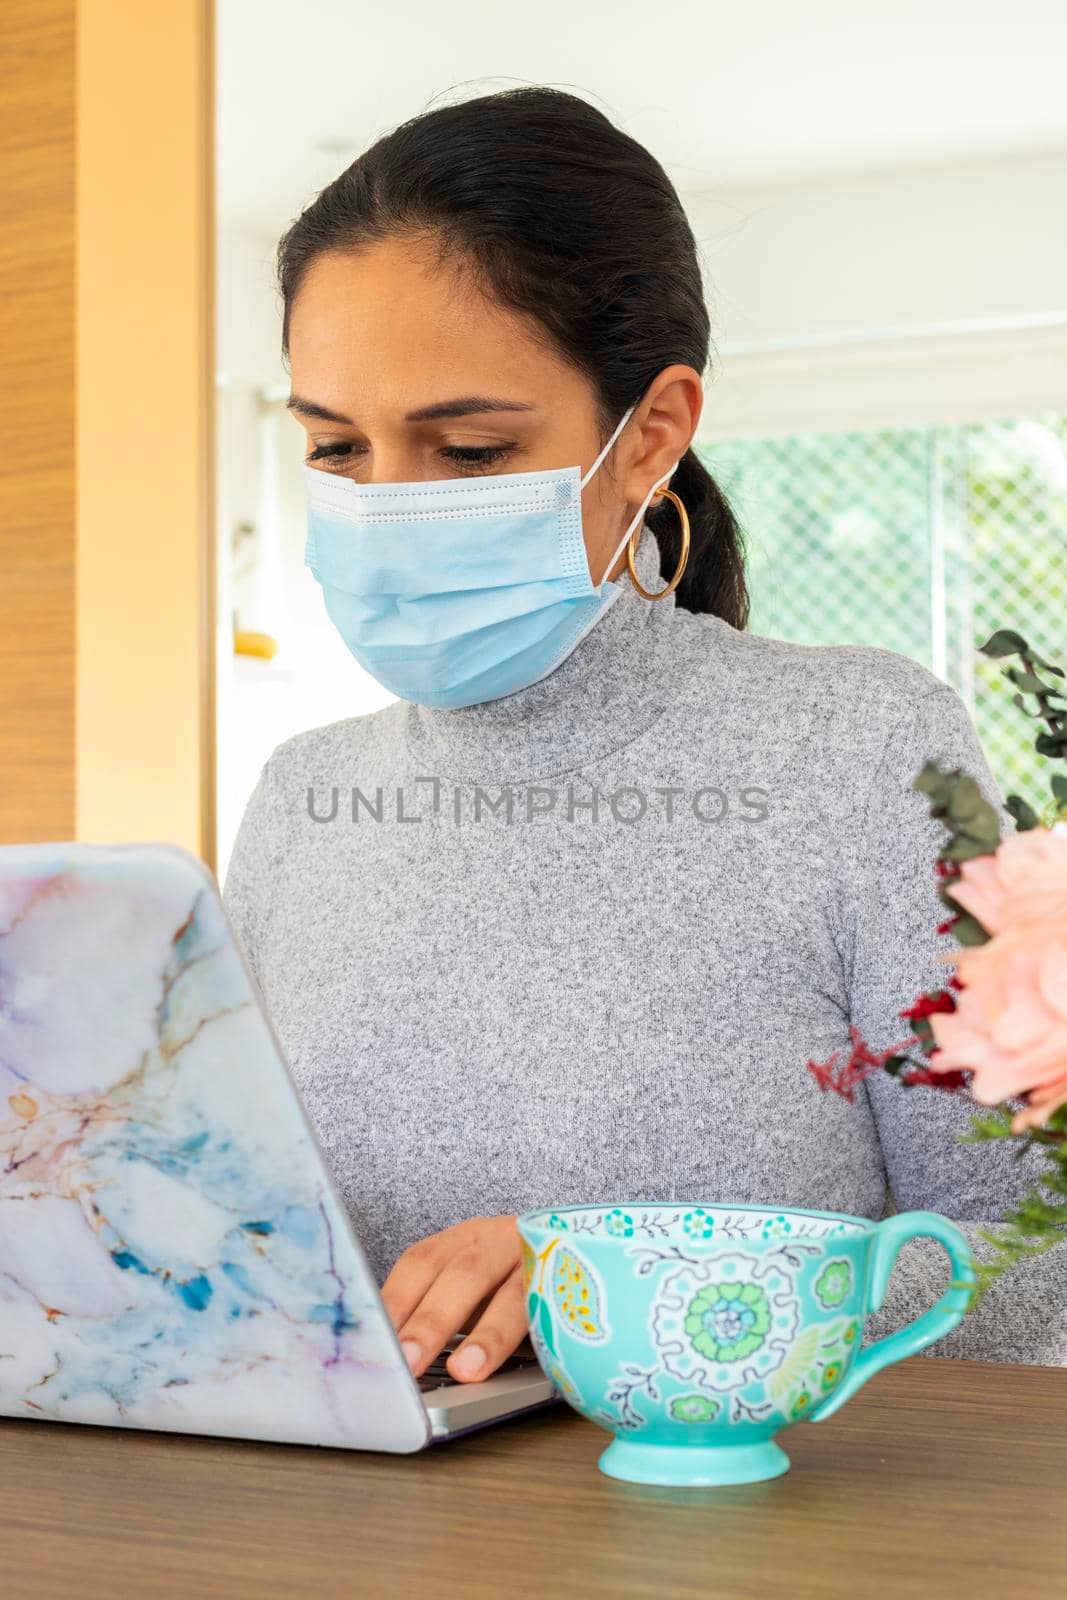 Beautiful Latin woman conducting home office for the corona virus pandemic by eagg13